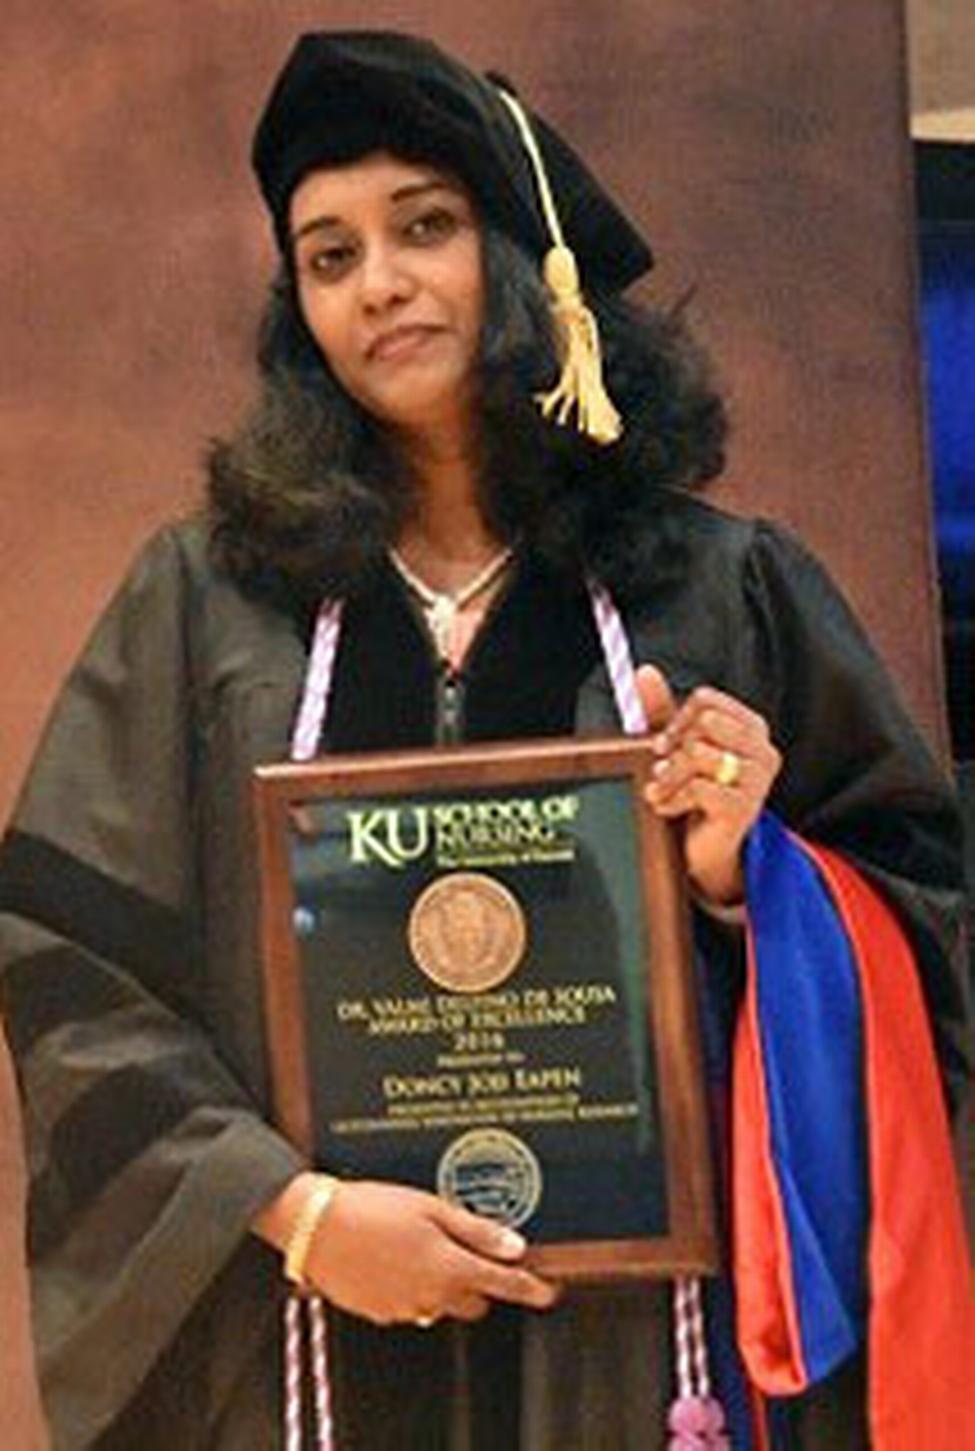 Dr. Eapen presented with the Dr. Valmi Delfino De Sousa Award of Excellence at KU School of Nursing’s commencement in May 2016.